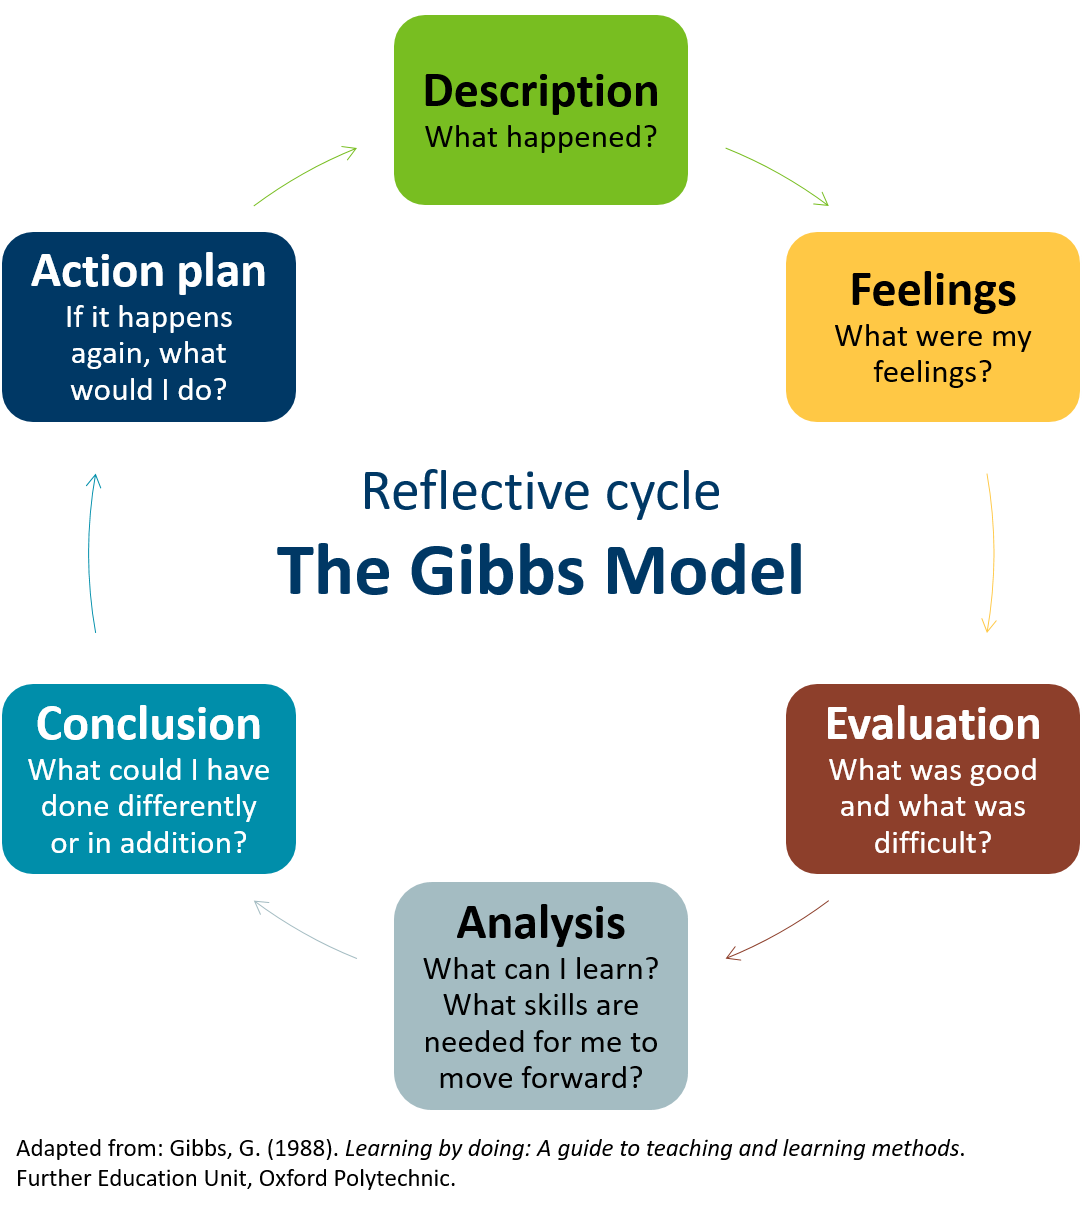 Gibbs reflective cycle: Description: What happened?Feelings: What were my feelings? Evaluation: What was good and what was difficult?Analysis: What can I learn? What skills are needed for me to move forward?Conclusion: What could I have done differently or in addition?Action plan: If it happens again, what would I do?